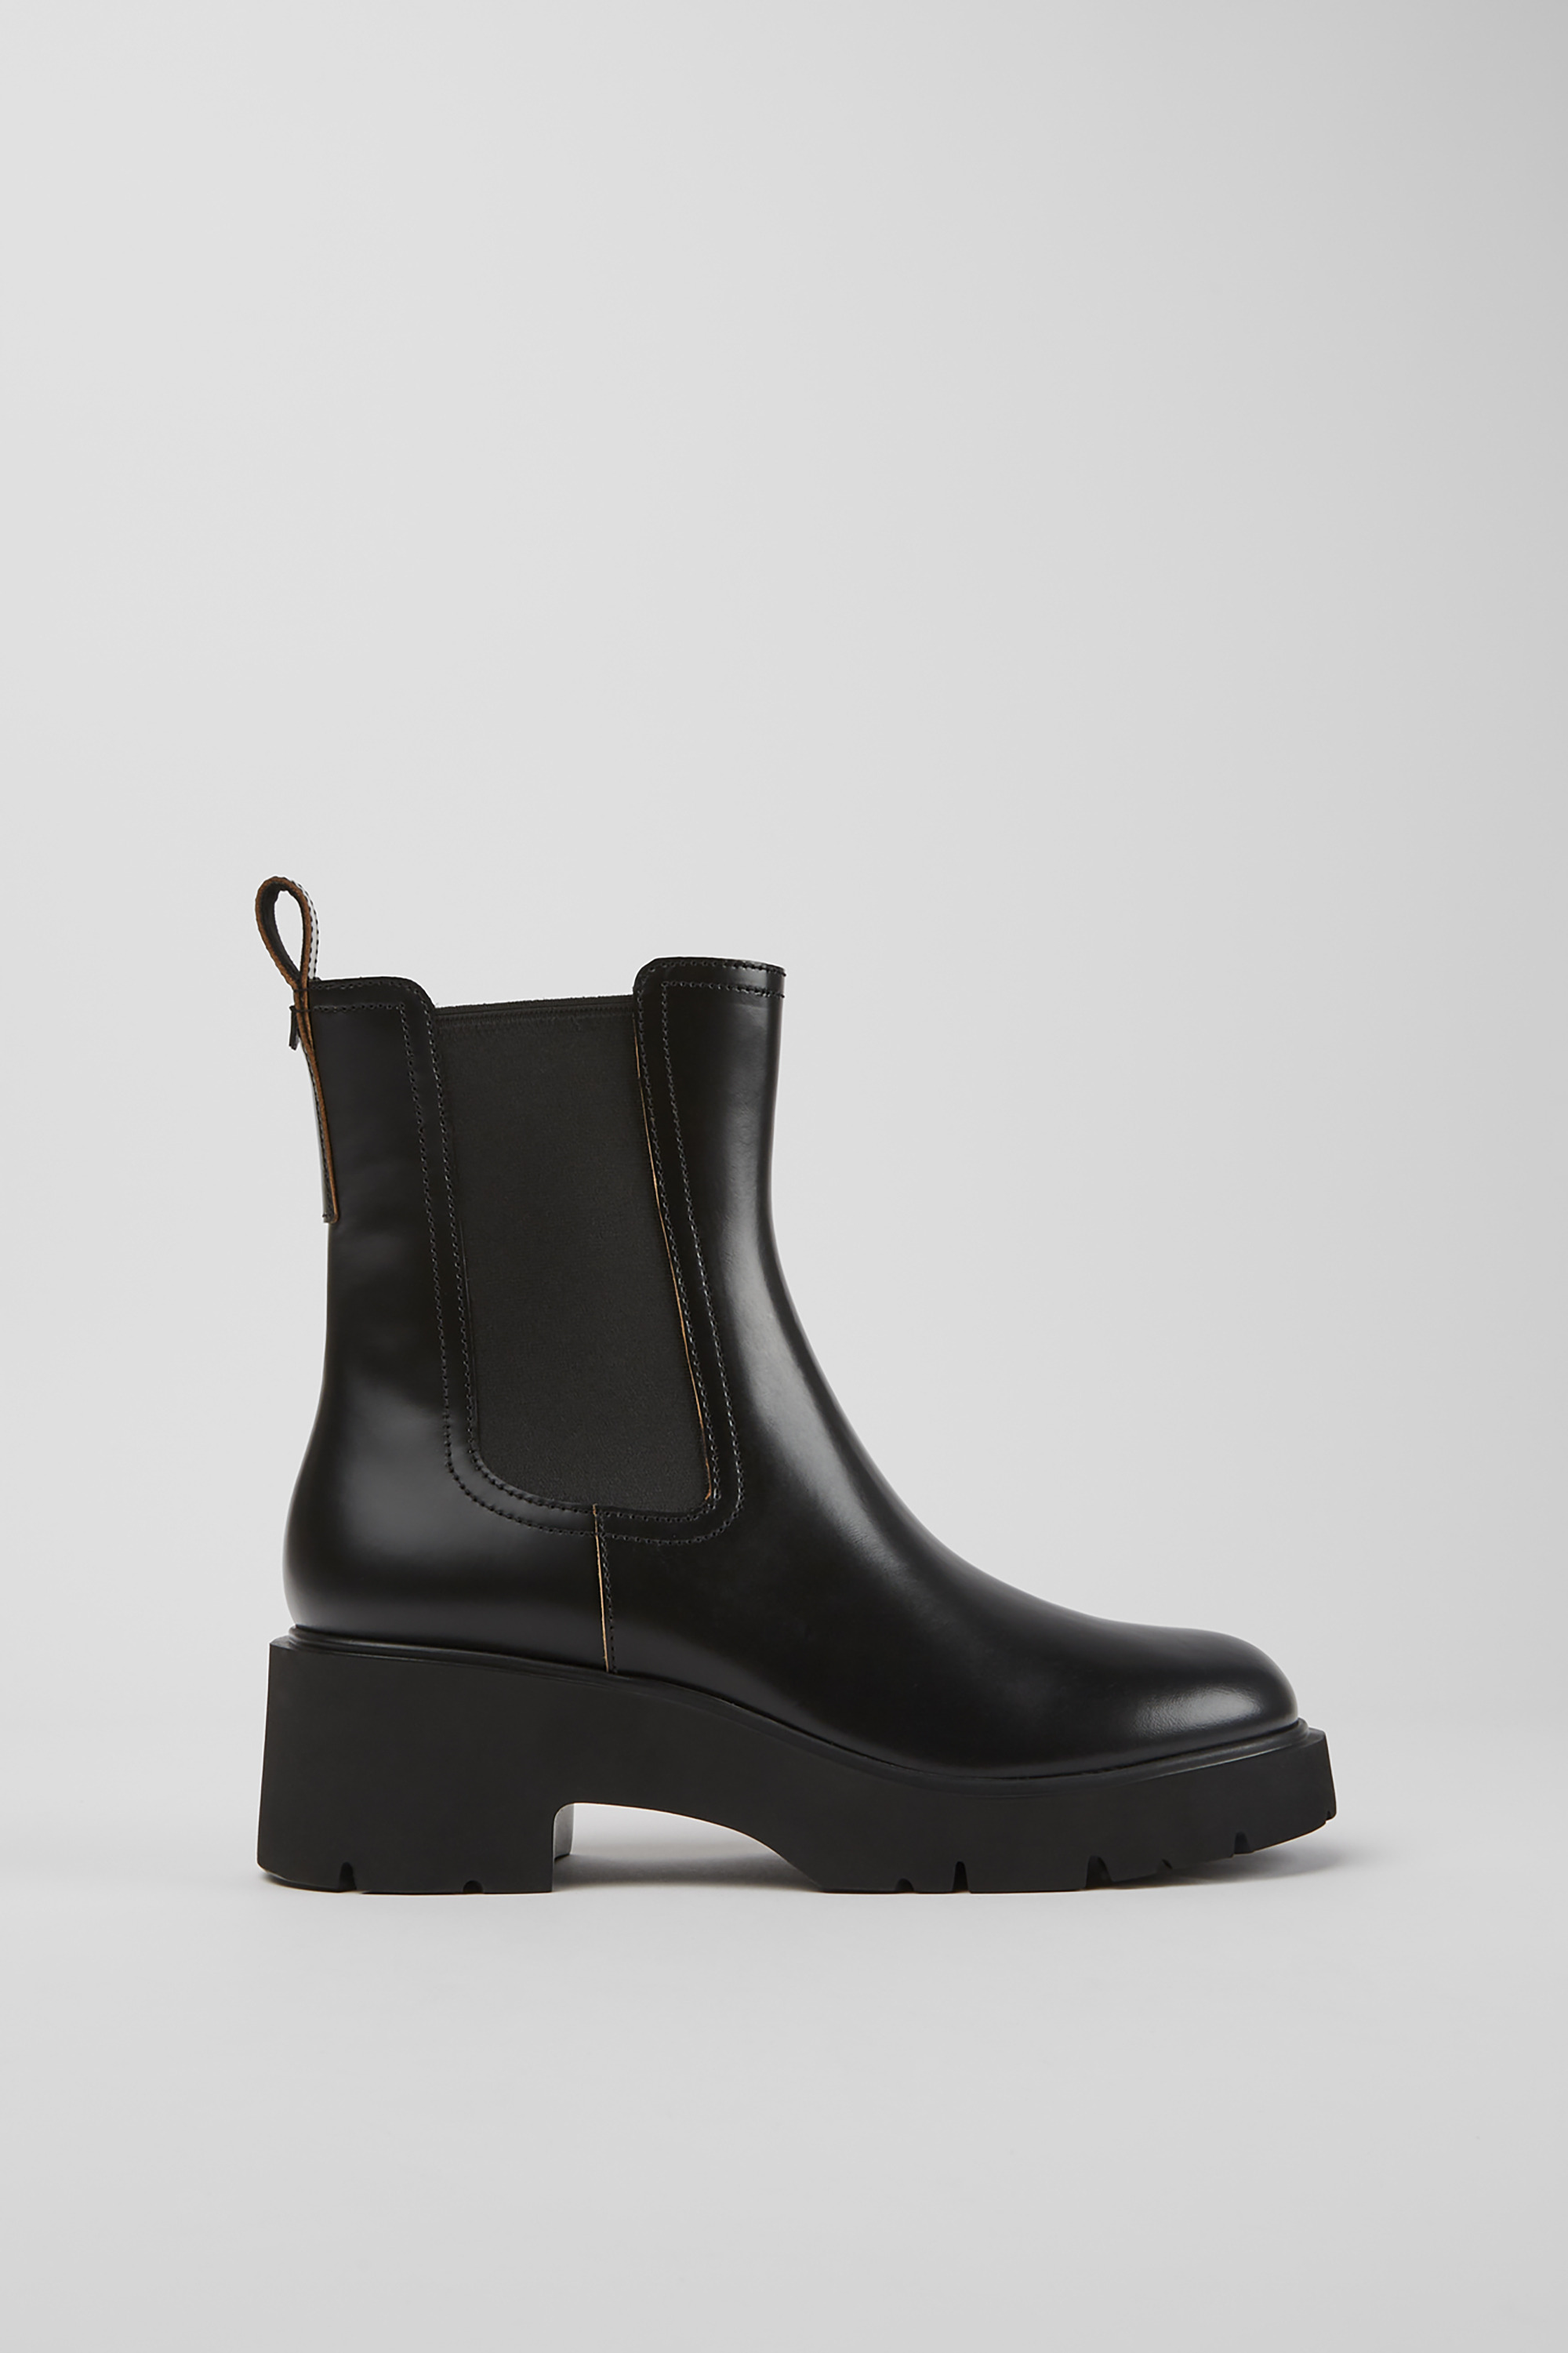 MLH Black Boots for Women - Spring/Summer collection - Camper USA